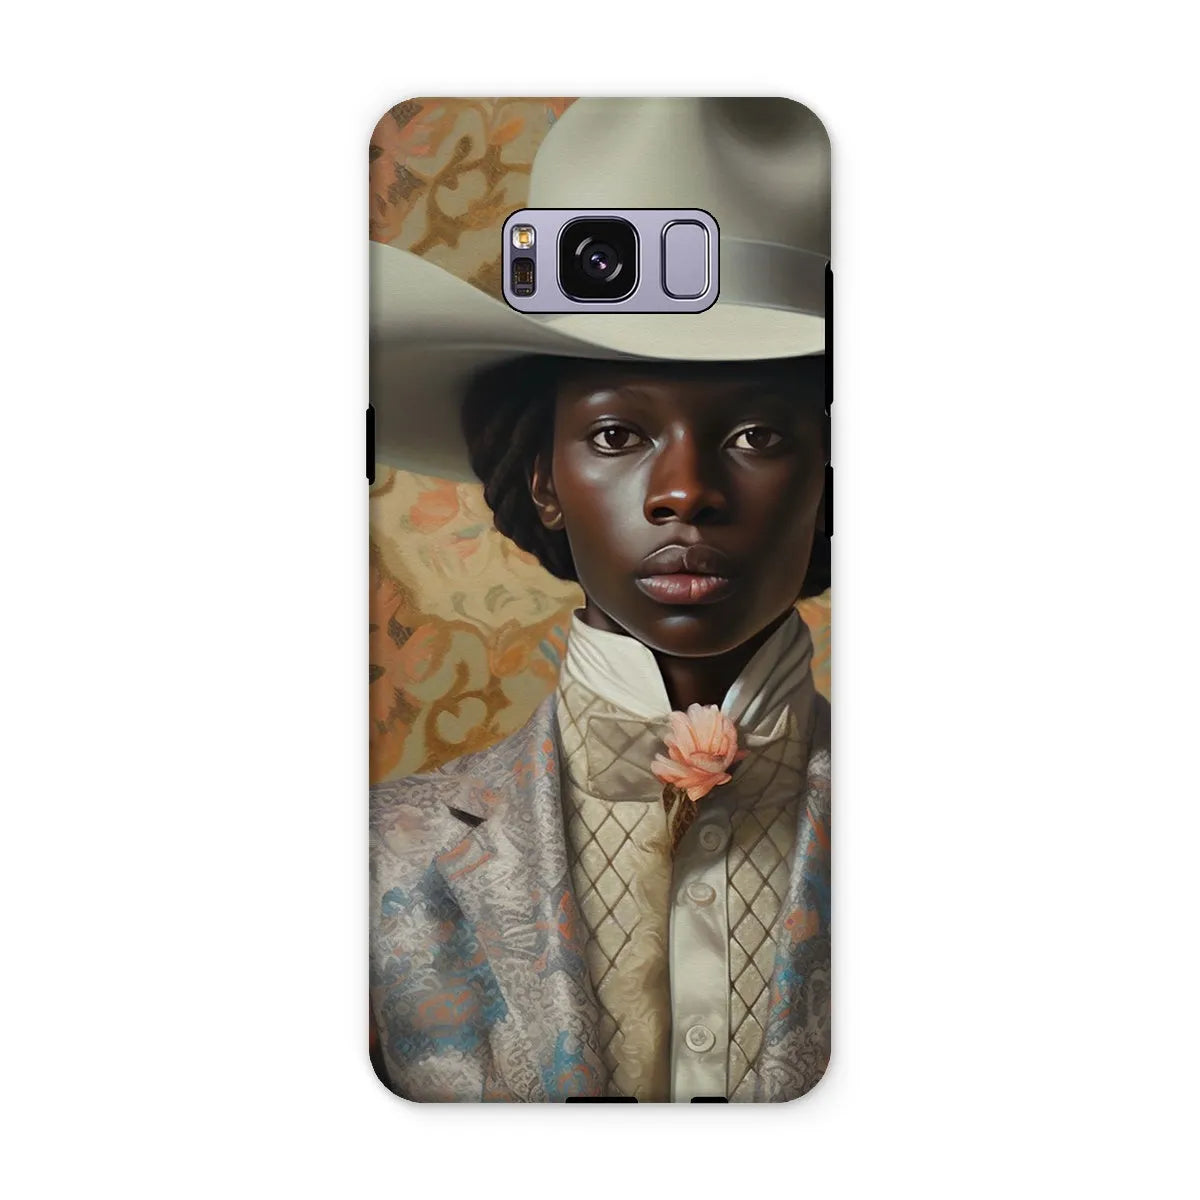 Caesar The Gay Cowboy - Gay Aesthetic Art Phone Case - Samsung Galaxy S8 Plus / Matte - Mobile Phone Cases - Aesthetic